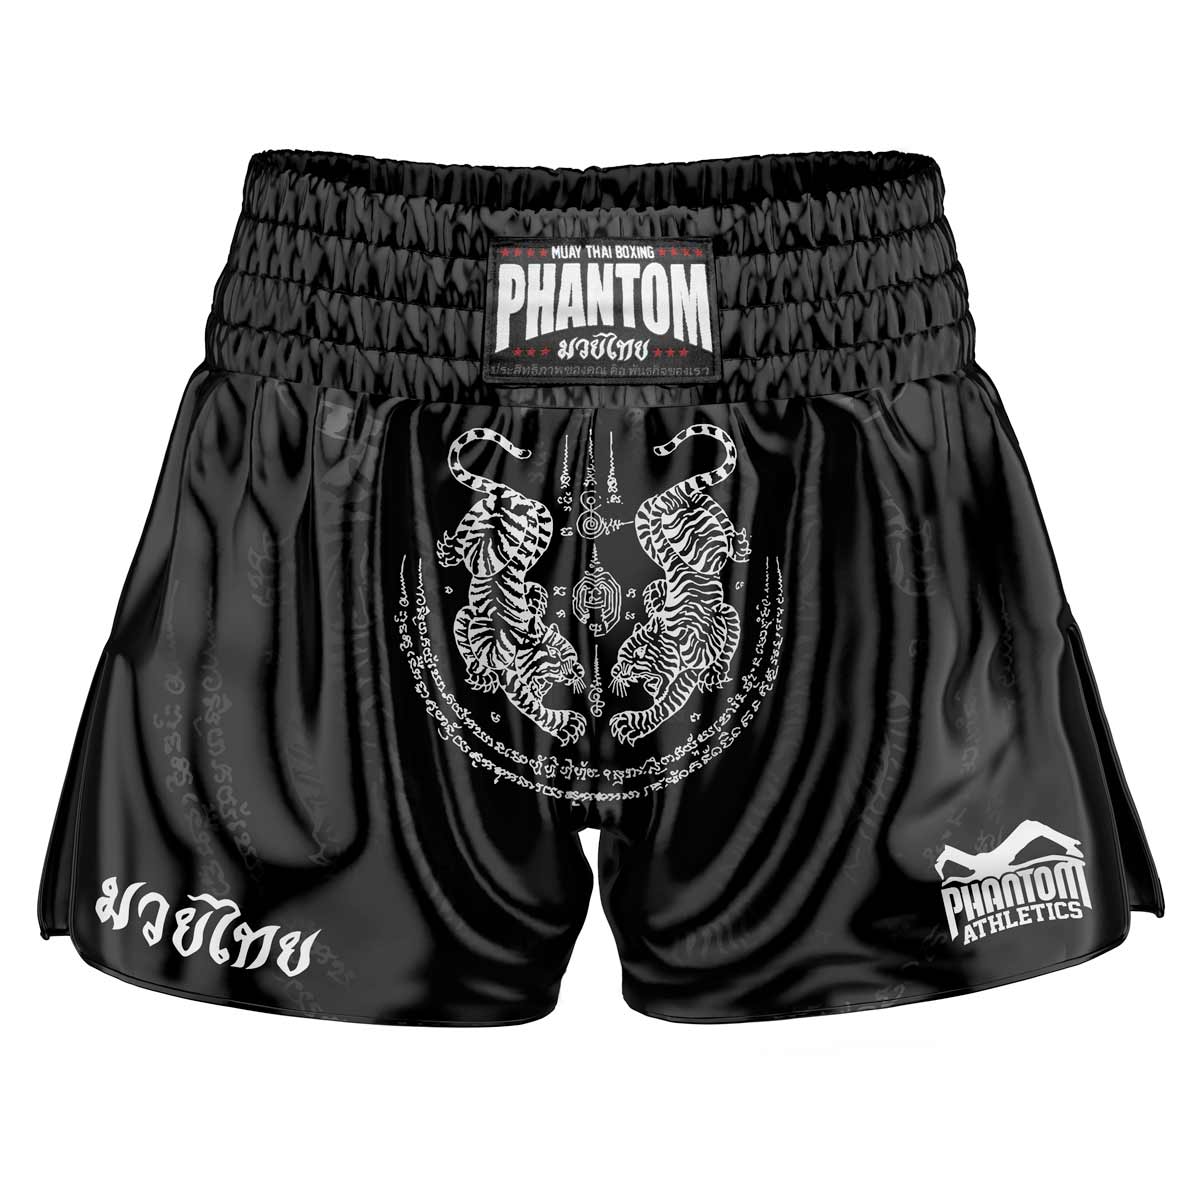 The Phantom Muay Thai shorts SAK YANT in black. Old school satin fabric with traditional tiger design gives you an original Thailand feeling. In the usual Phantom Athletics quality. Ideal for your Thai boxing training and competition.